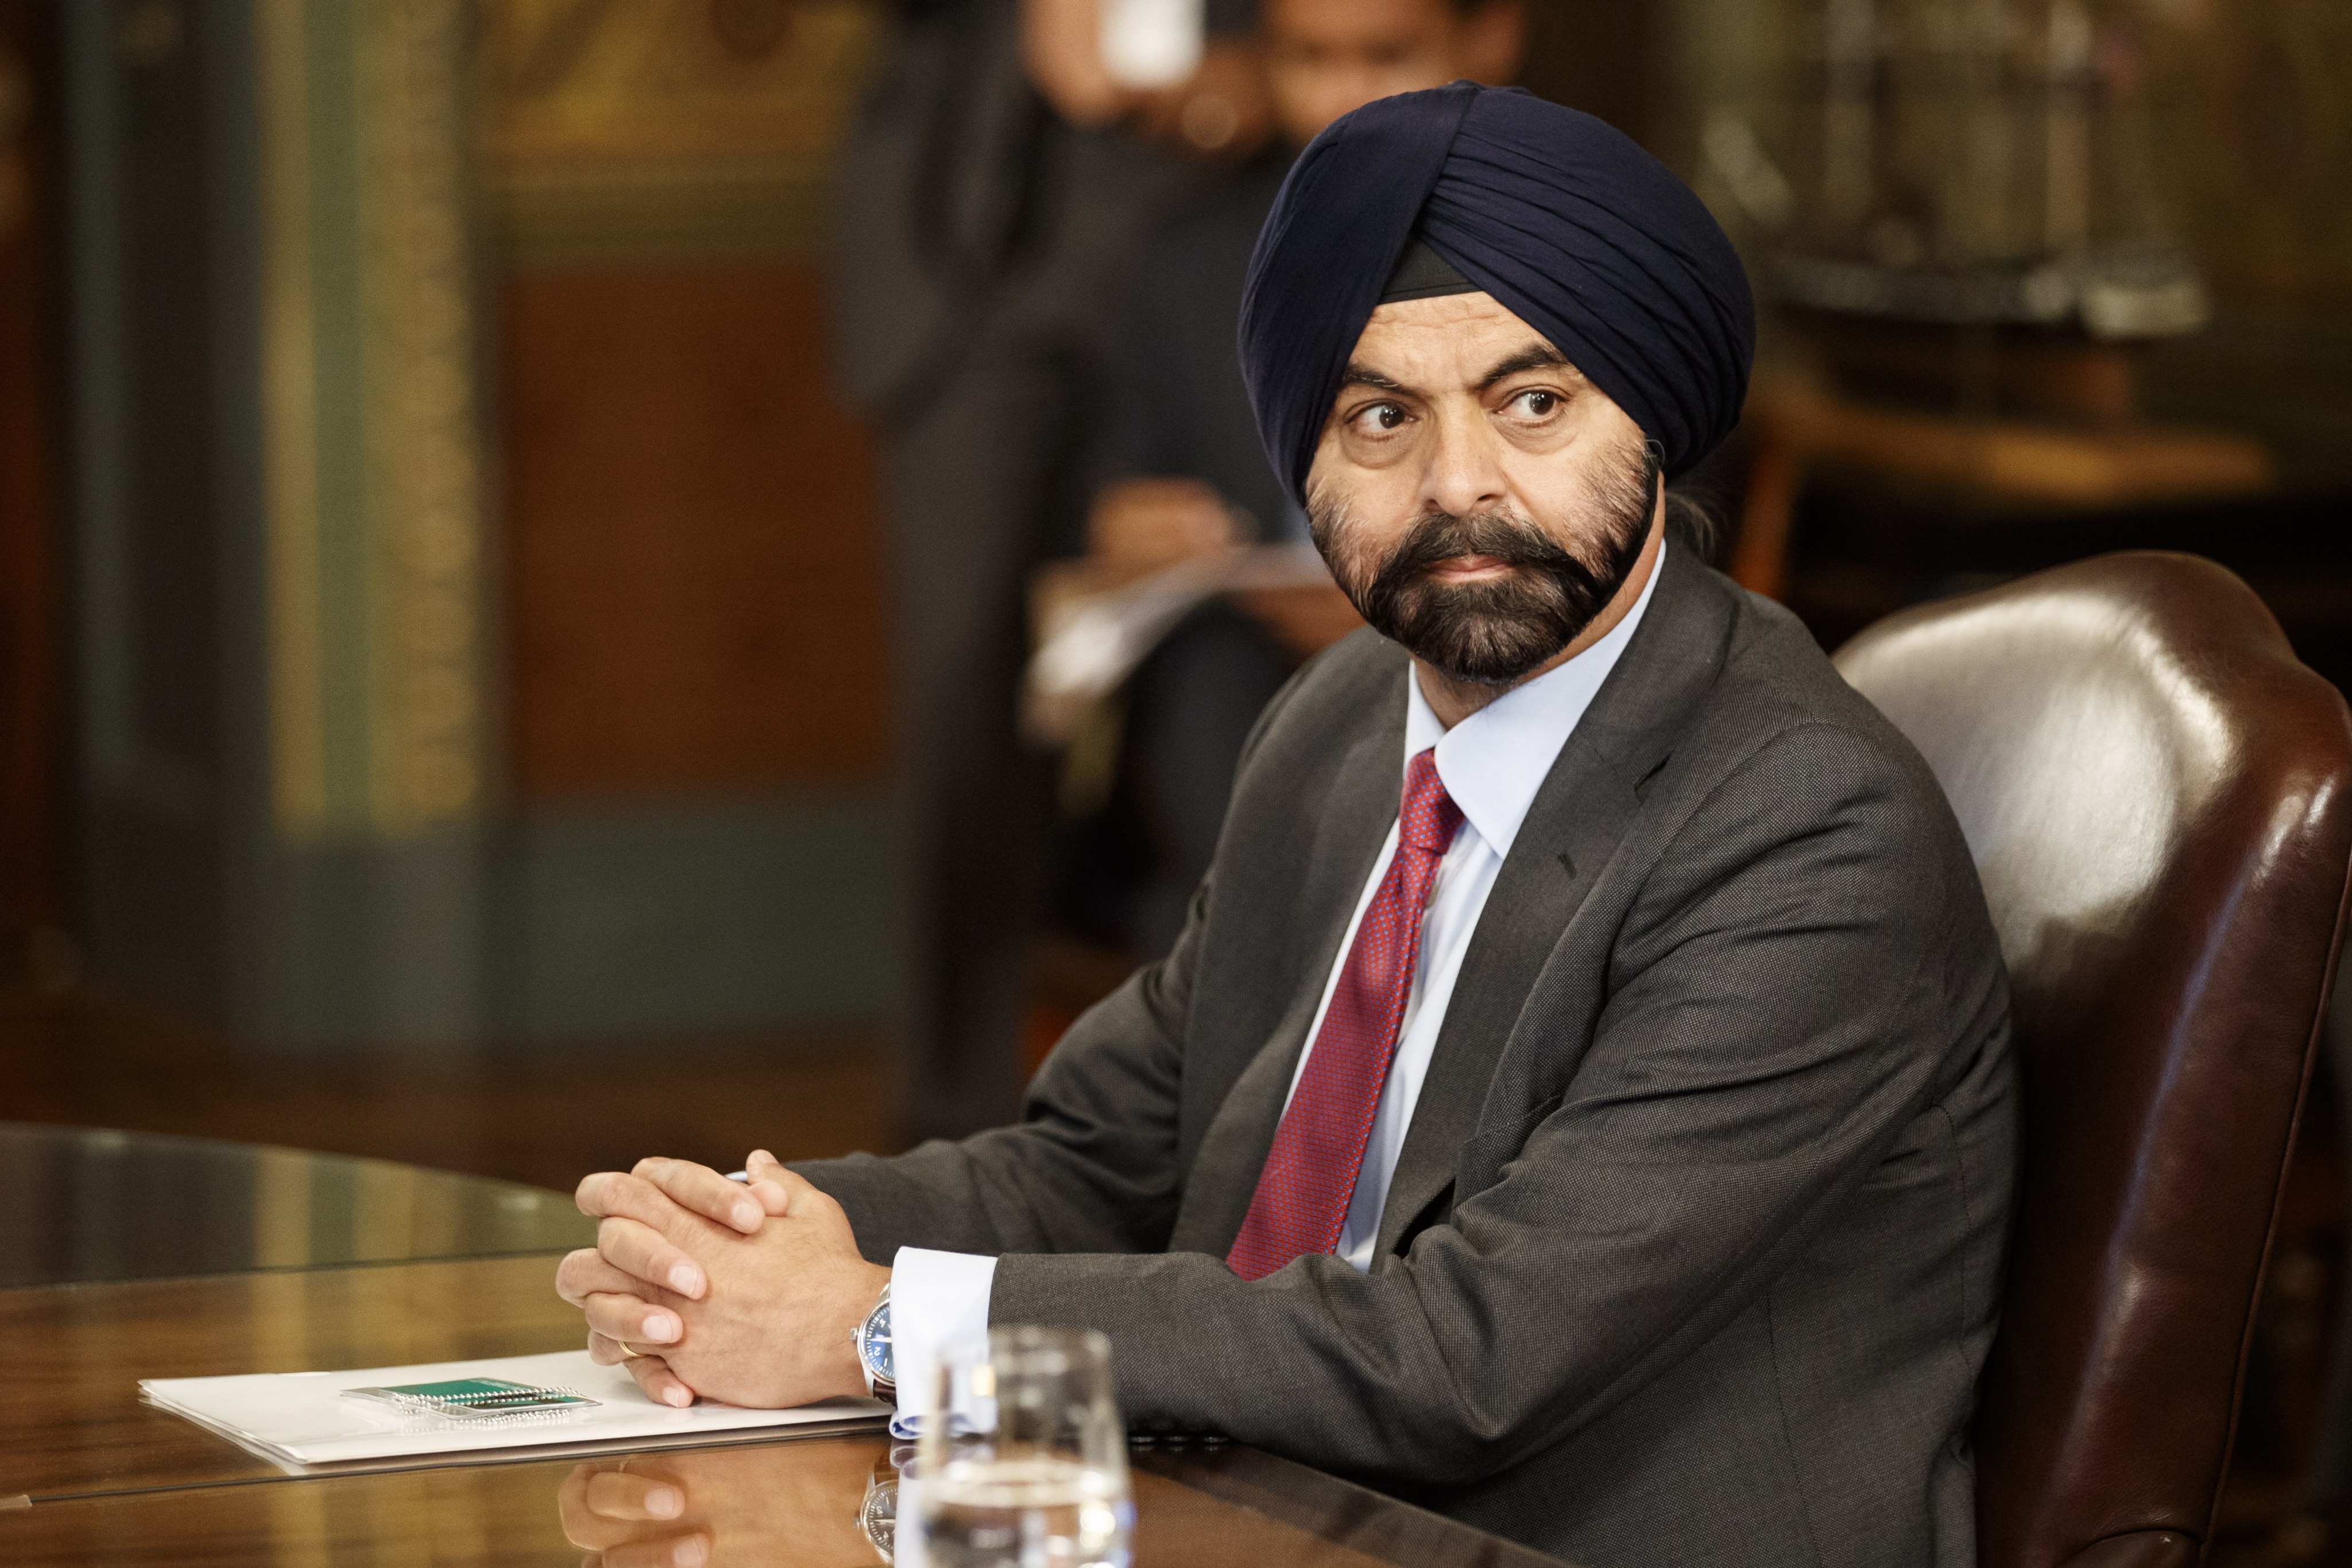 Ajay Banga, then chairman of Mastercard, during a meeting with US vice-president Kamala Harris and other CEOs in Washington on May 27, 2021. US President Joe Biden nominated Banga for the role of president of the World Bank. Photo: EPA-EFE